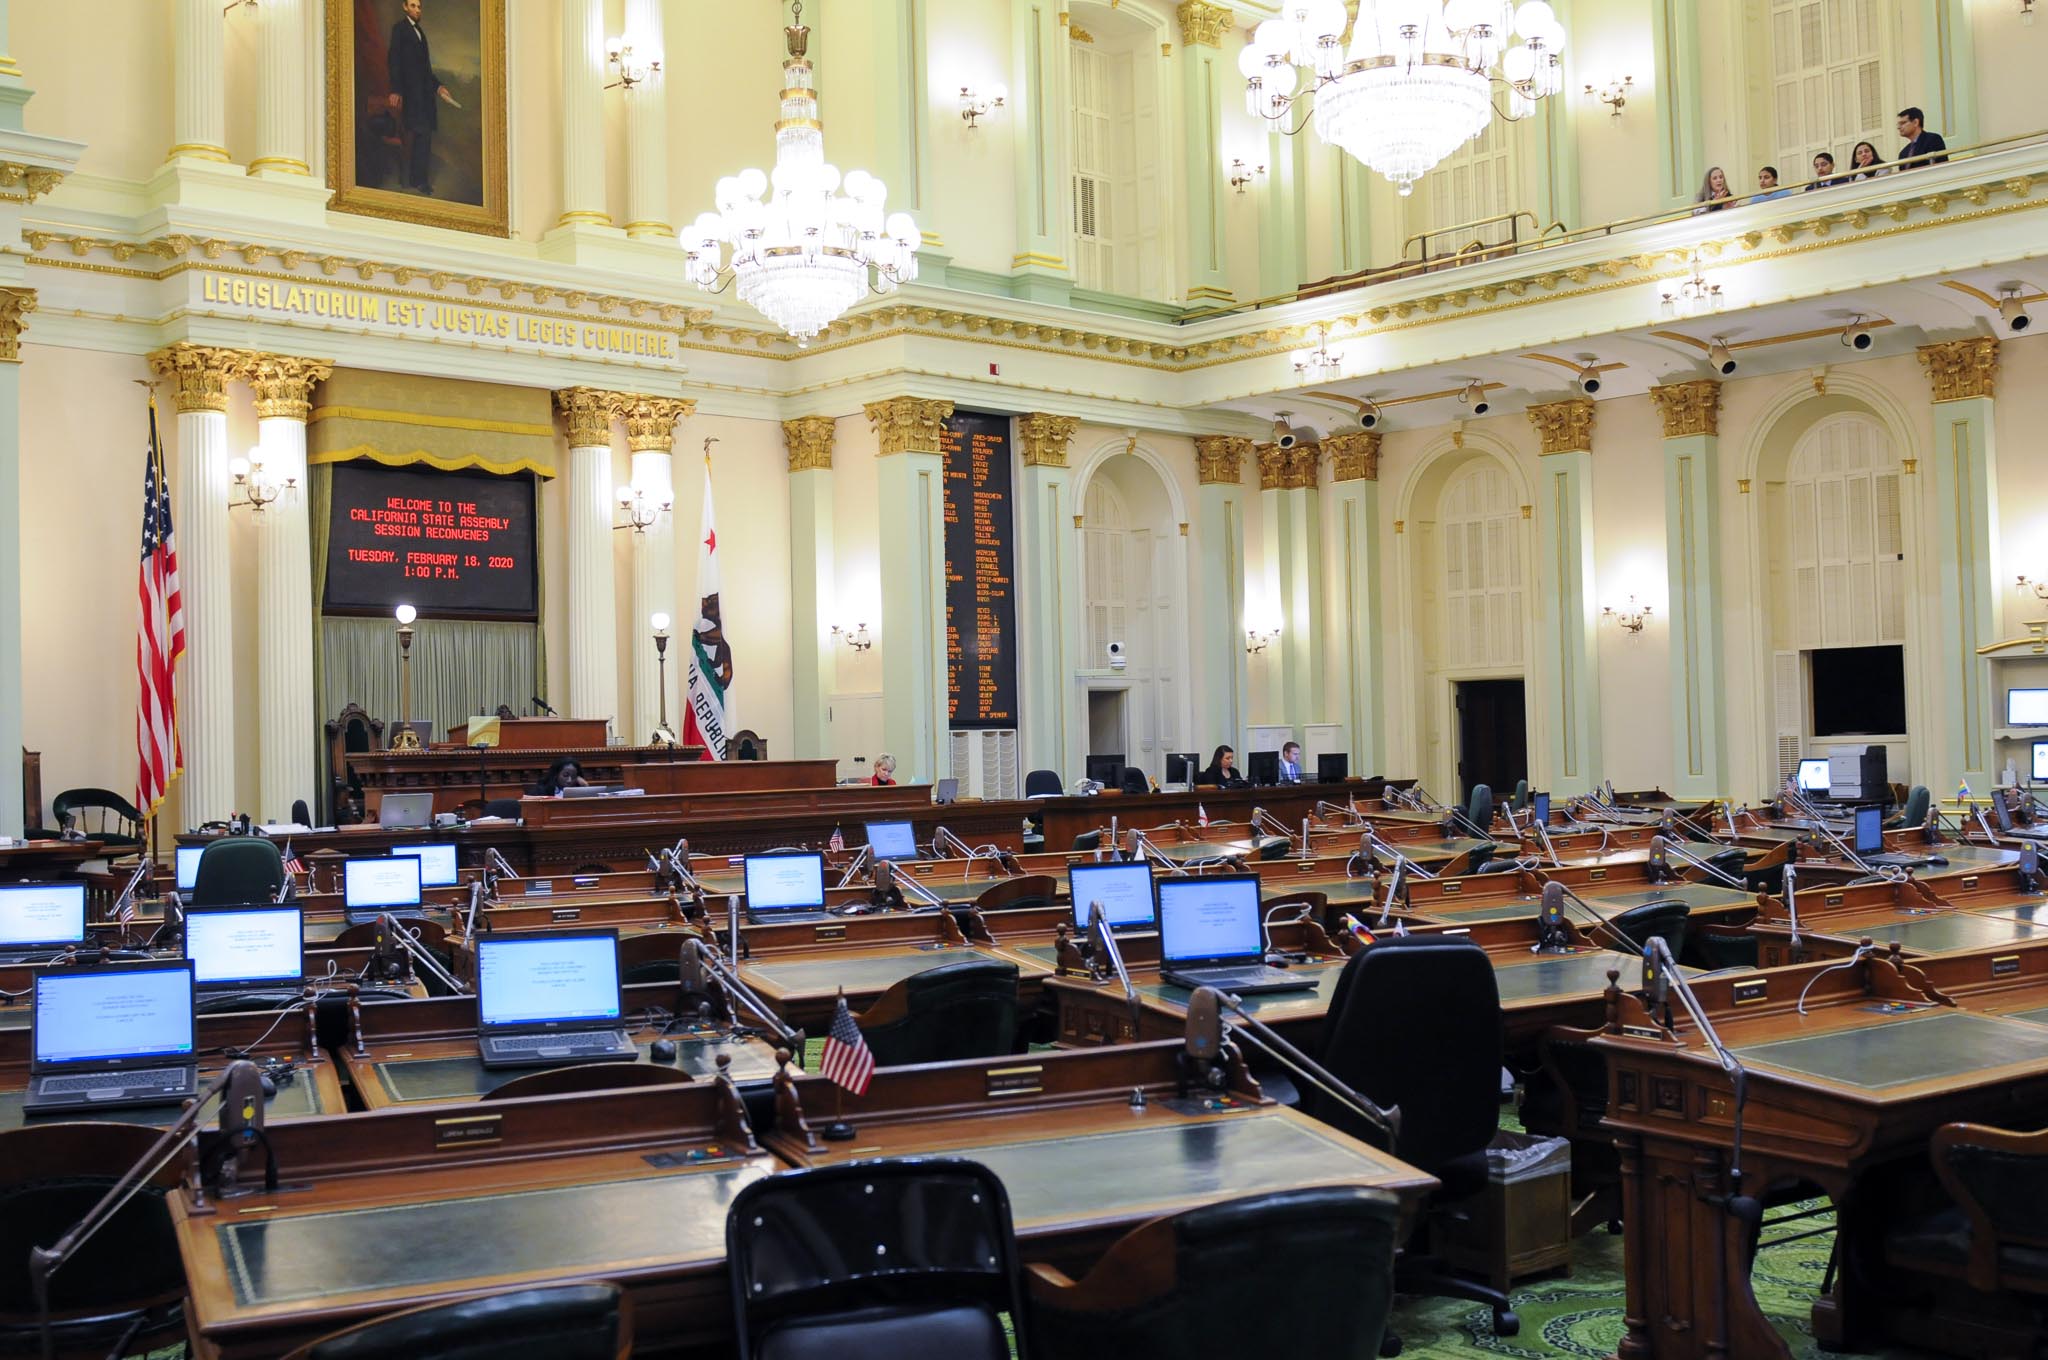 California State Assembly nearly empty except for a few folks in the balcony.